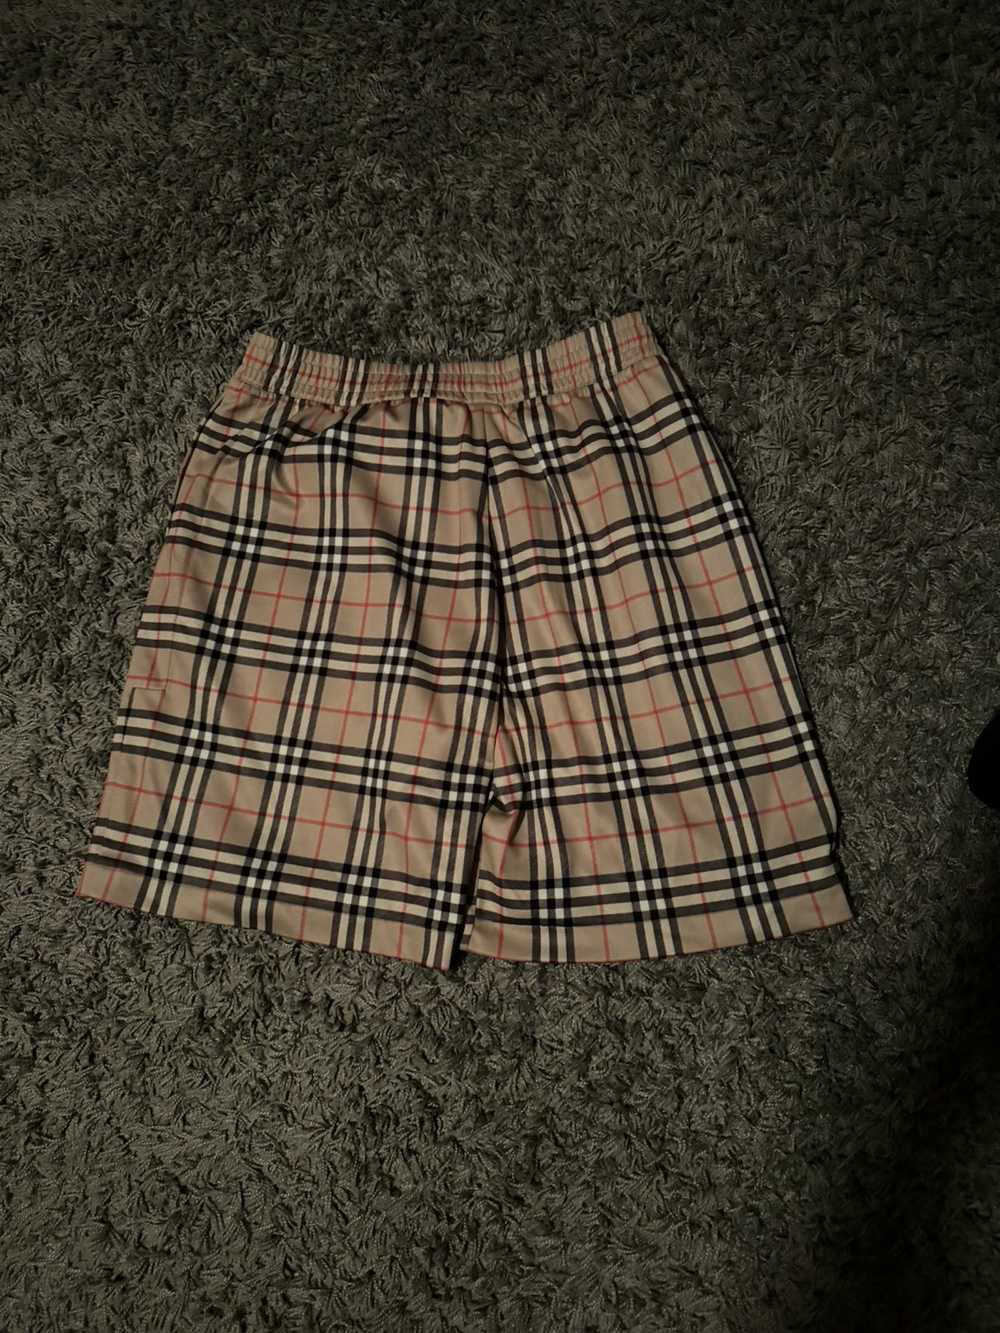 Burberry × Streetwear Burberry Checkered Shorts - image 2